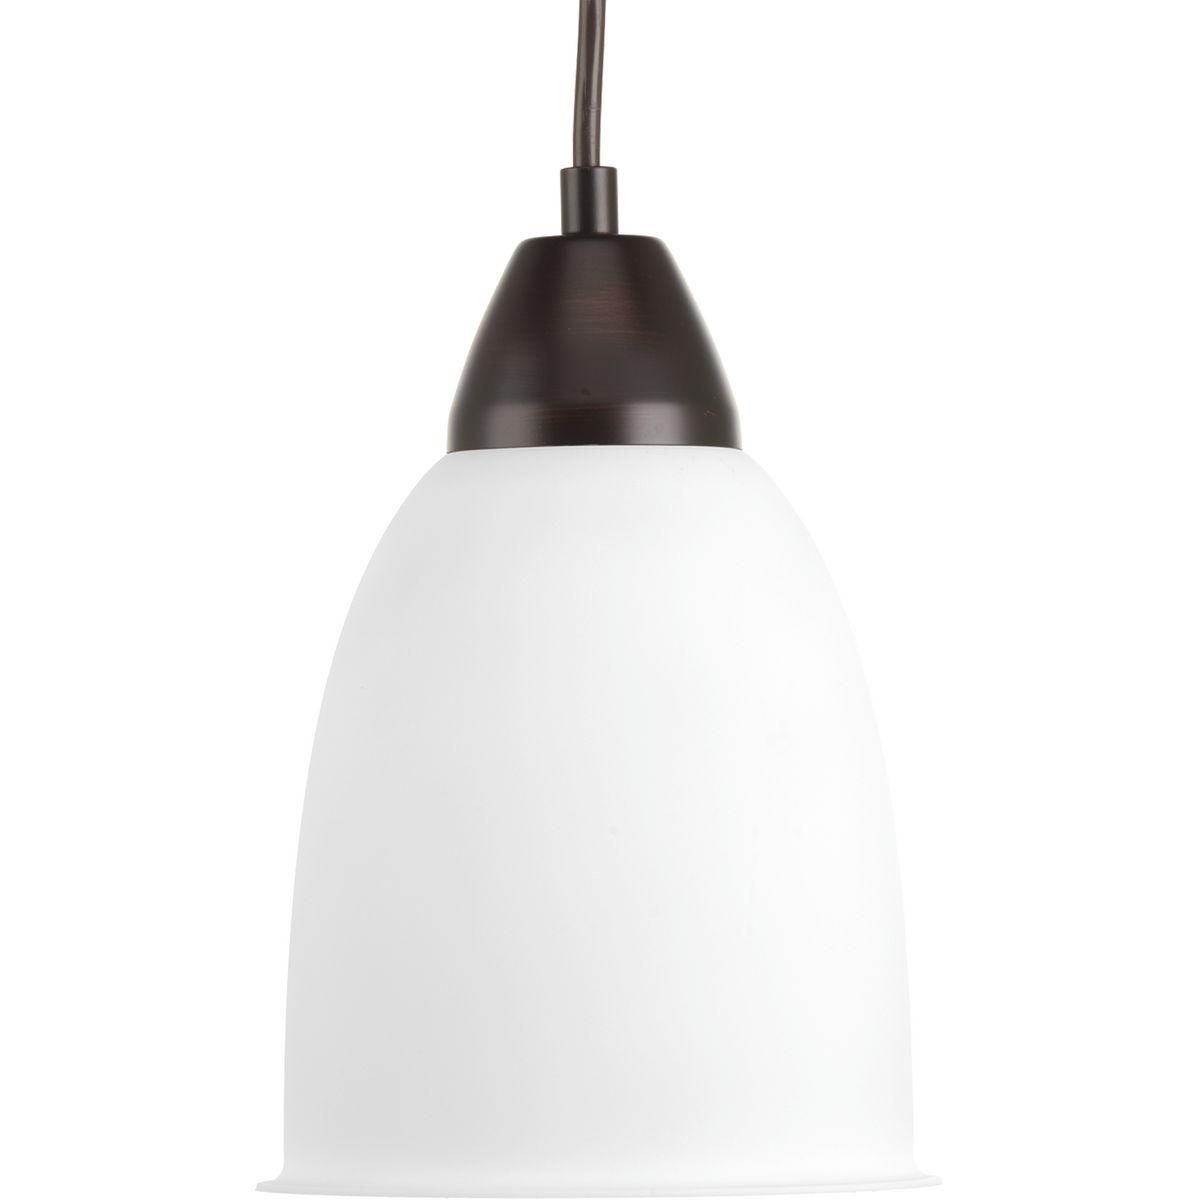 Hubbell P5176-2030K9 One-light cord-hung pendant with an LED source that is neatly tucked inside a frosted acrylic shade. A light commercial pendant ideal for restaurants, bar and hotel applications. Antique Bronze finish.  ; Light commercial LED pendant. ; Frosted acrylic sh